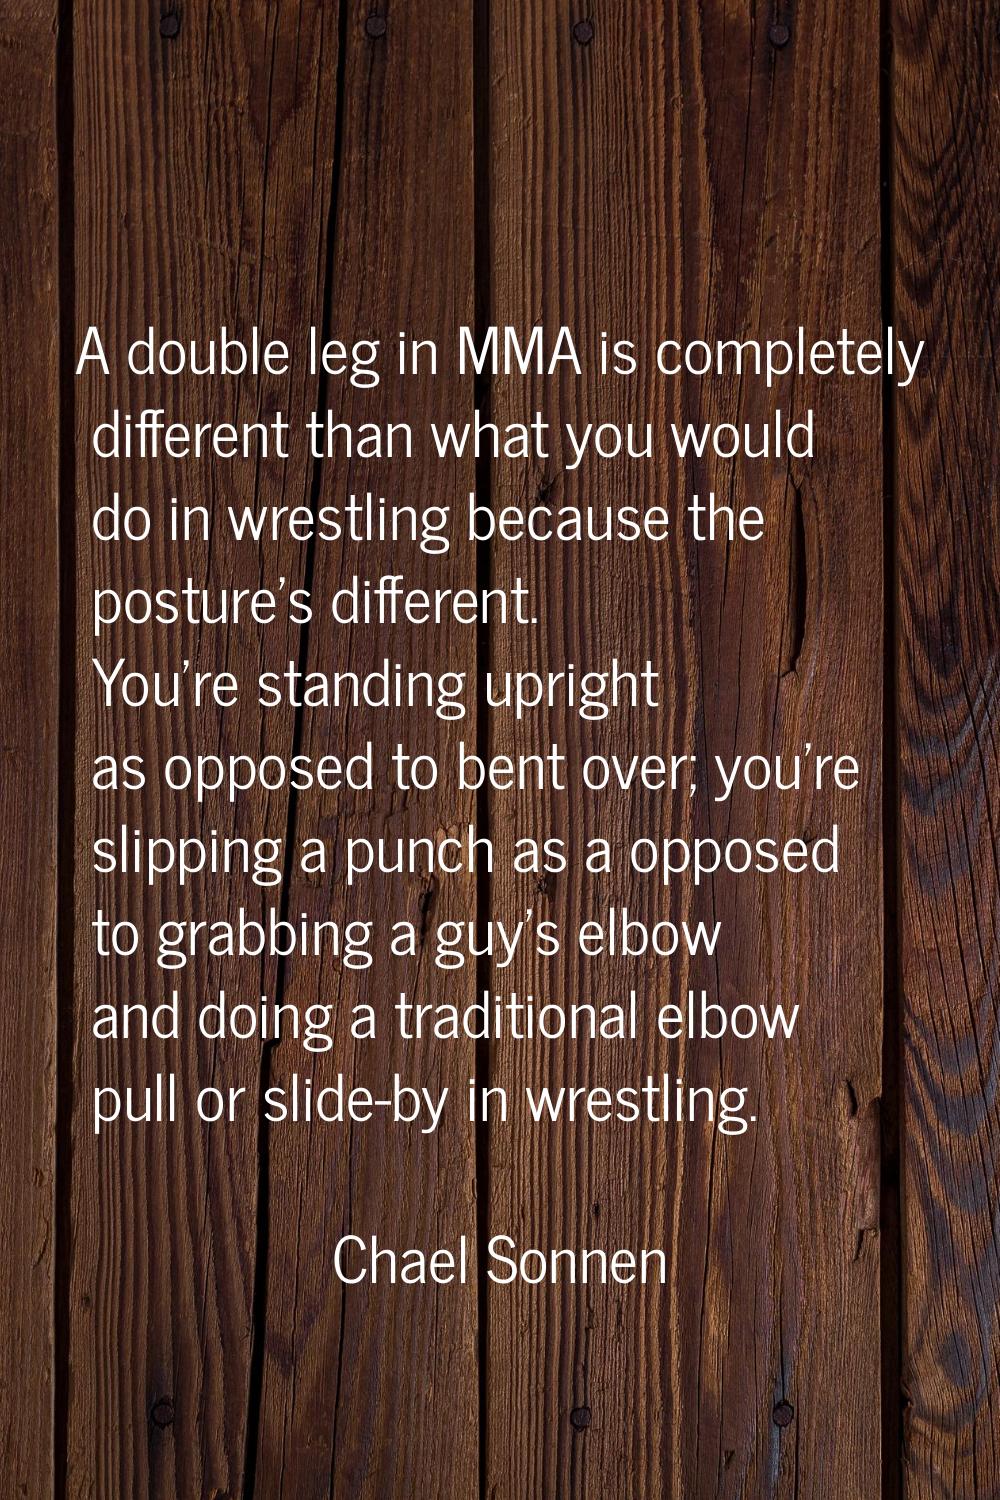 A double leg in MMA is completely different than what you would do in wrestling because the posture